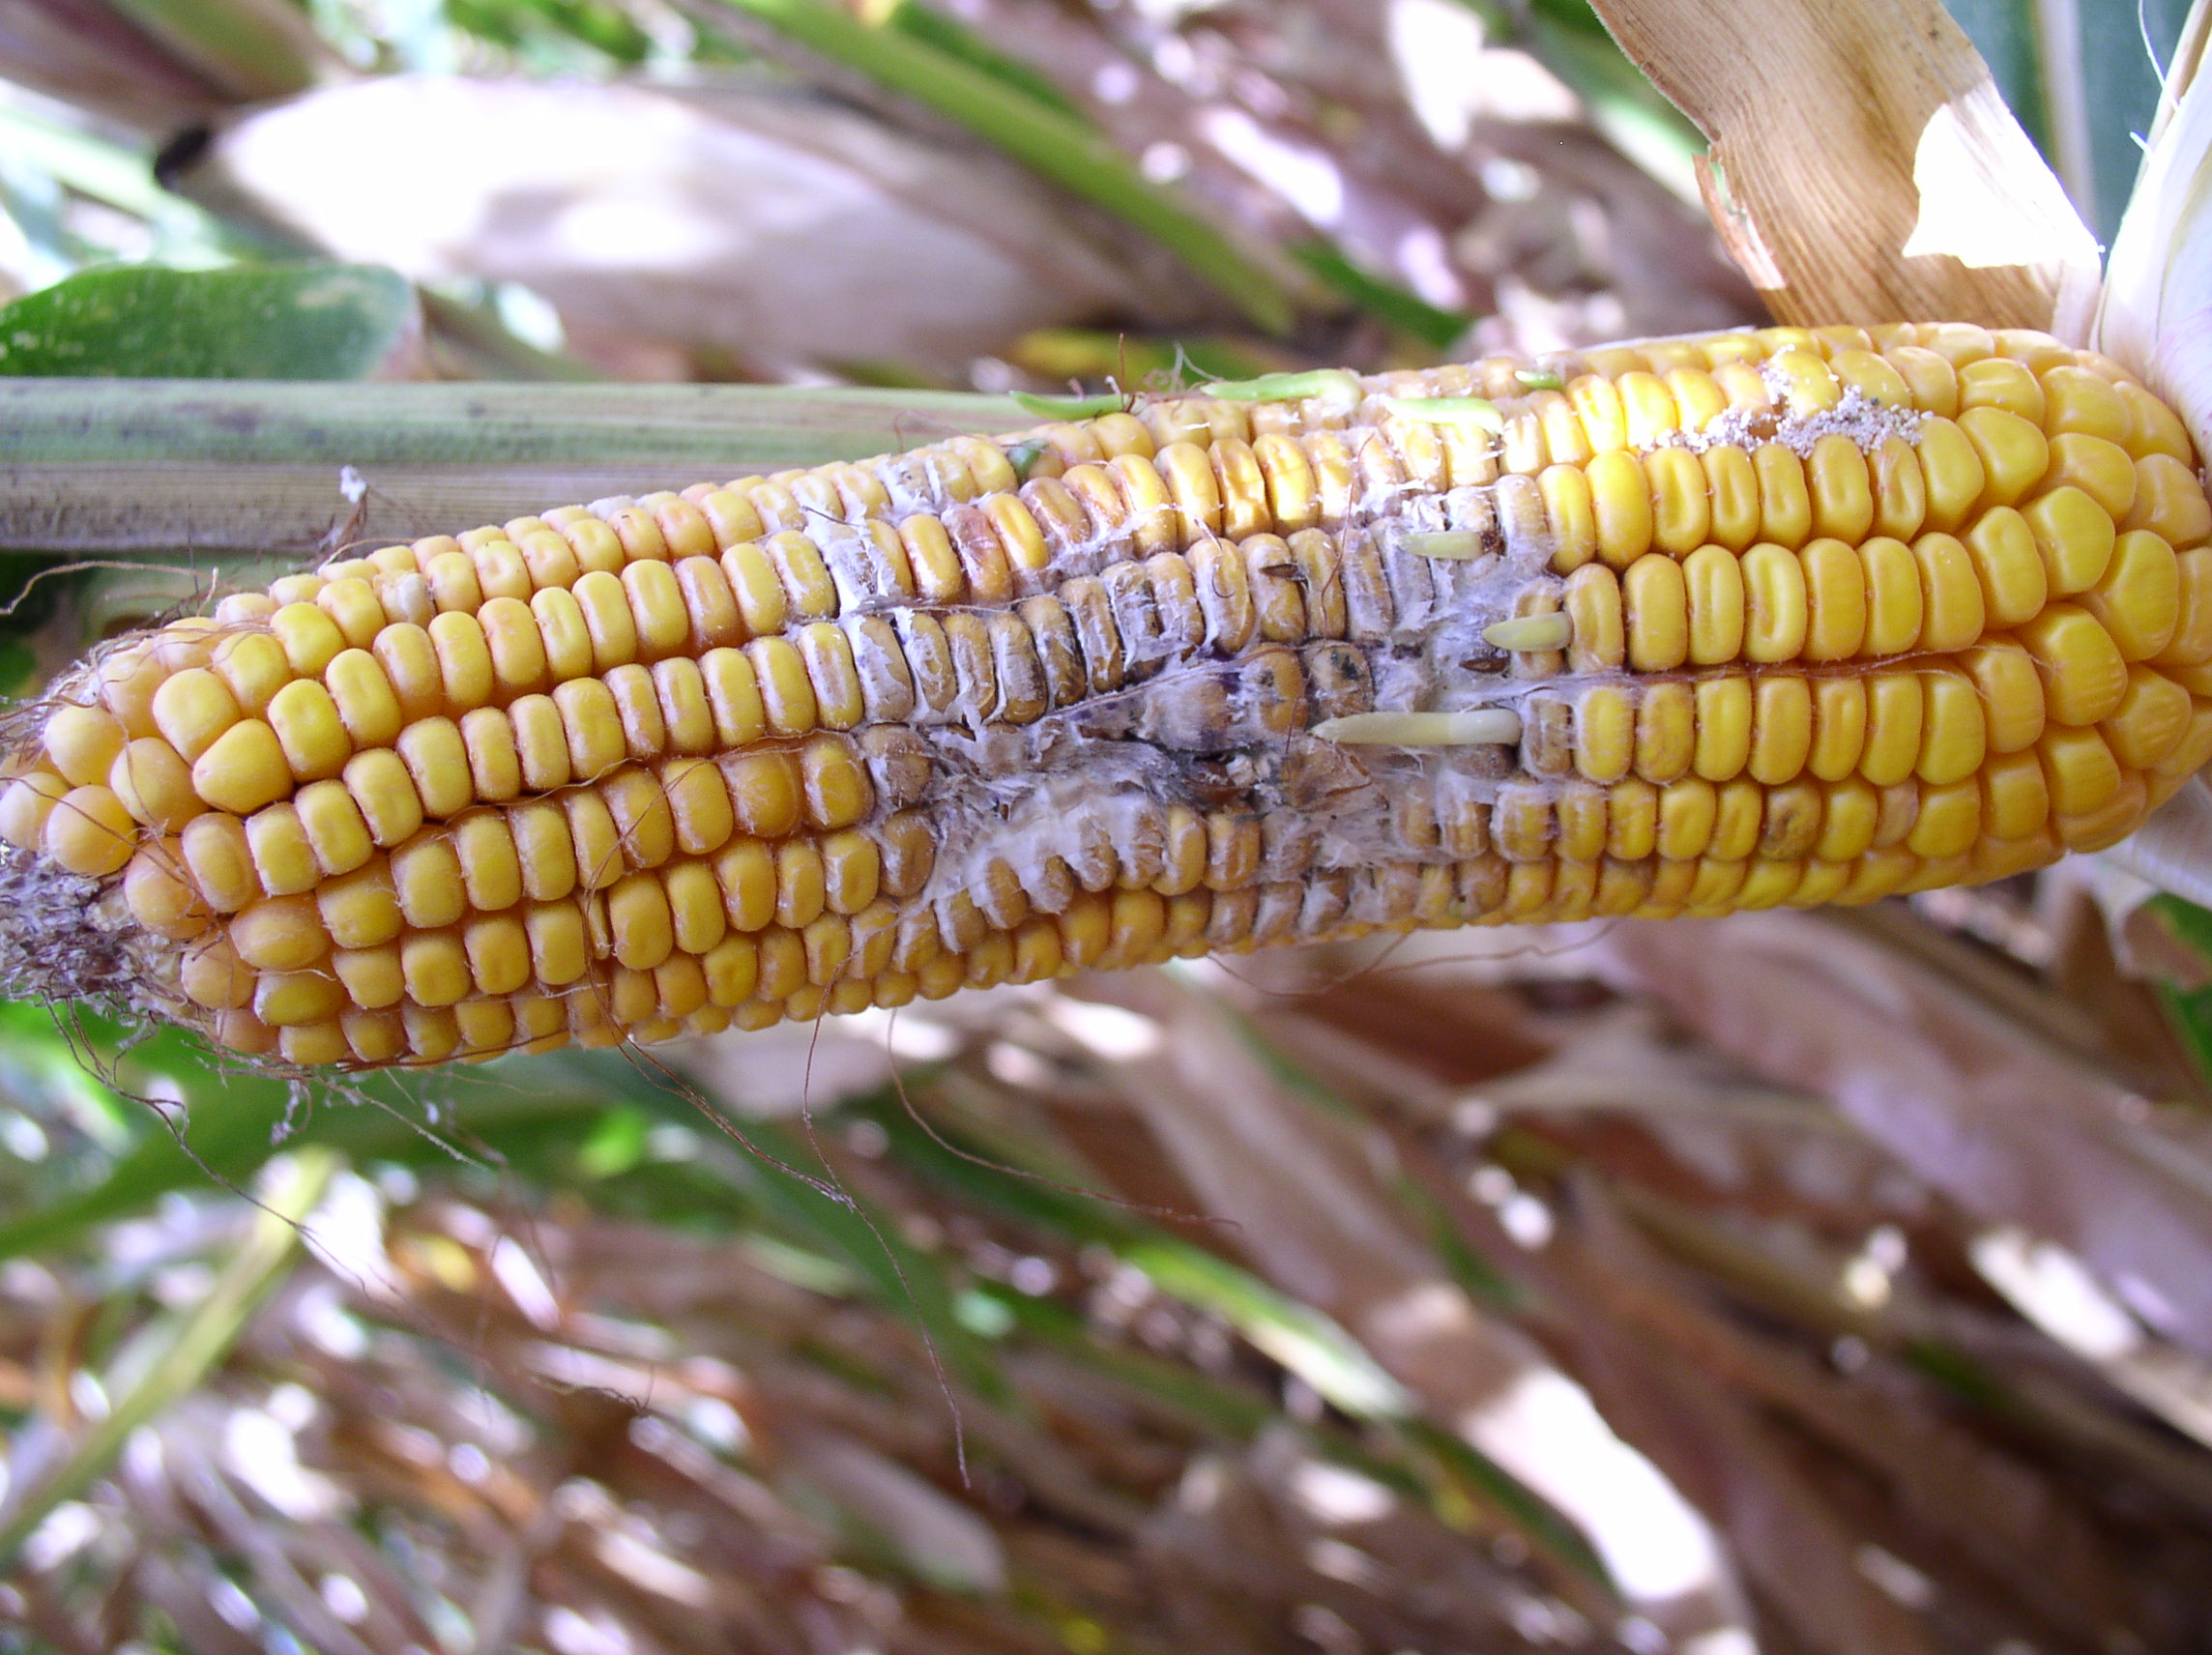 Fusarium ear rot often begins with insect-damaged kernels.